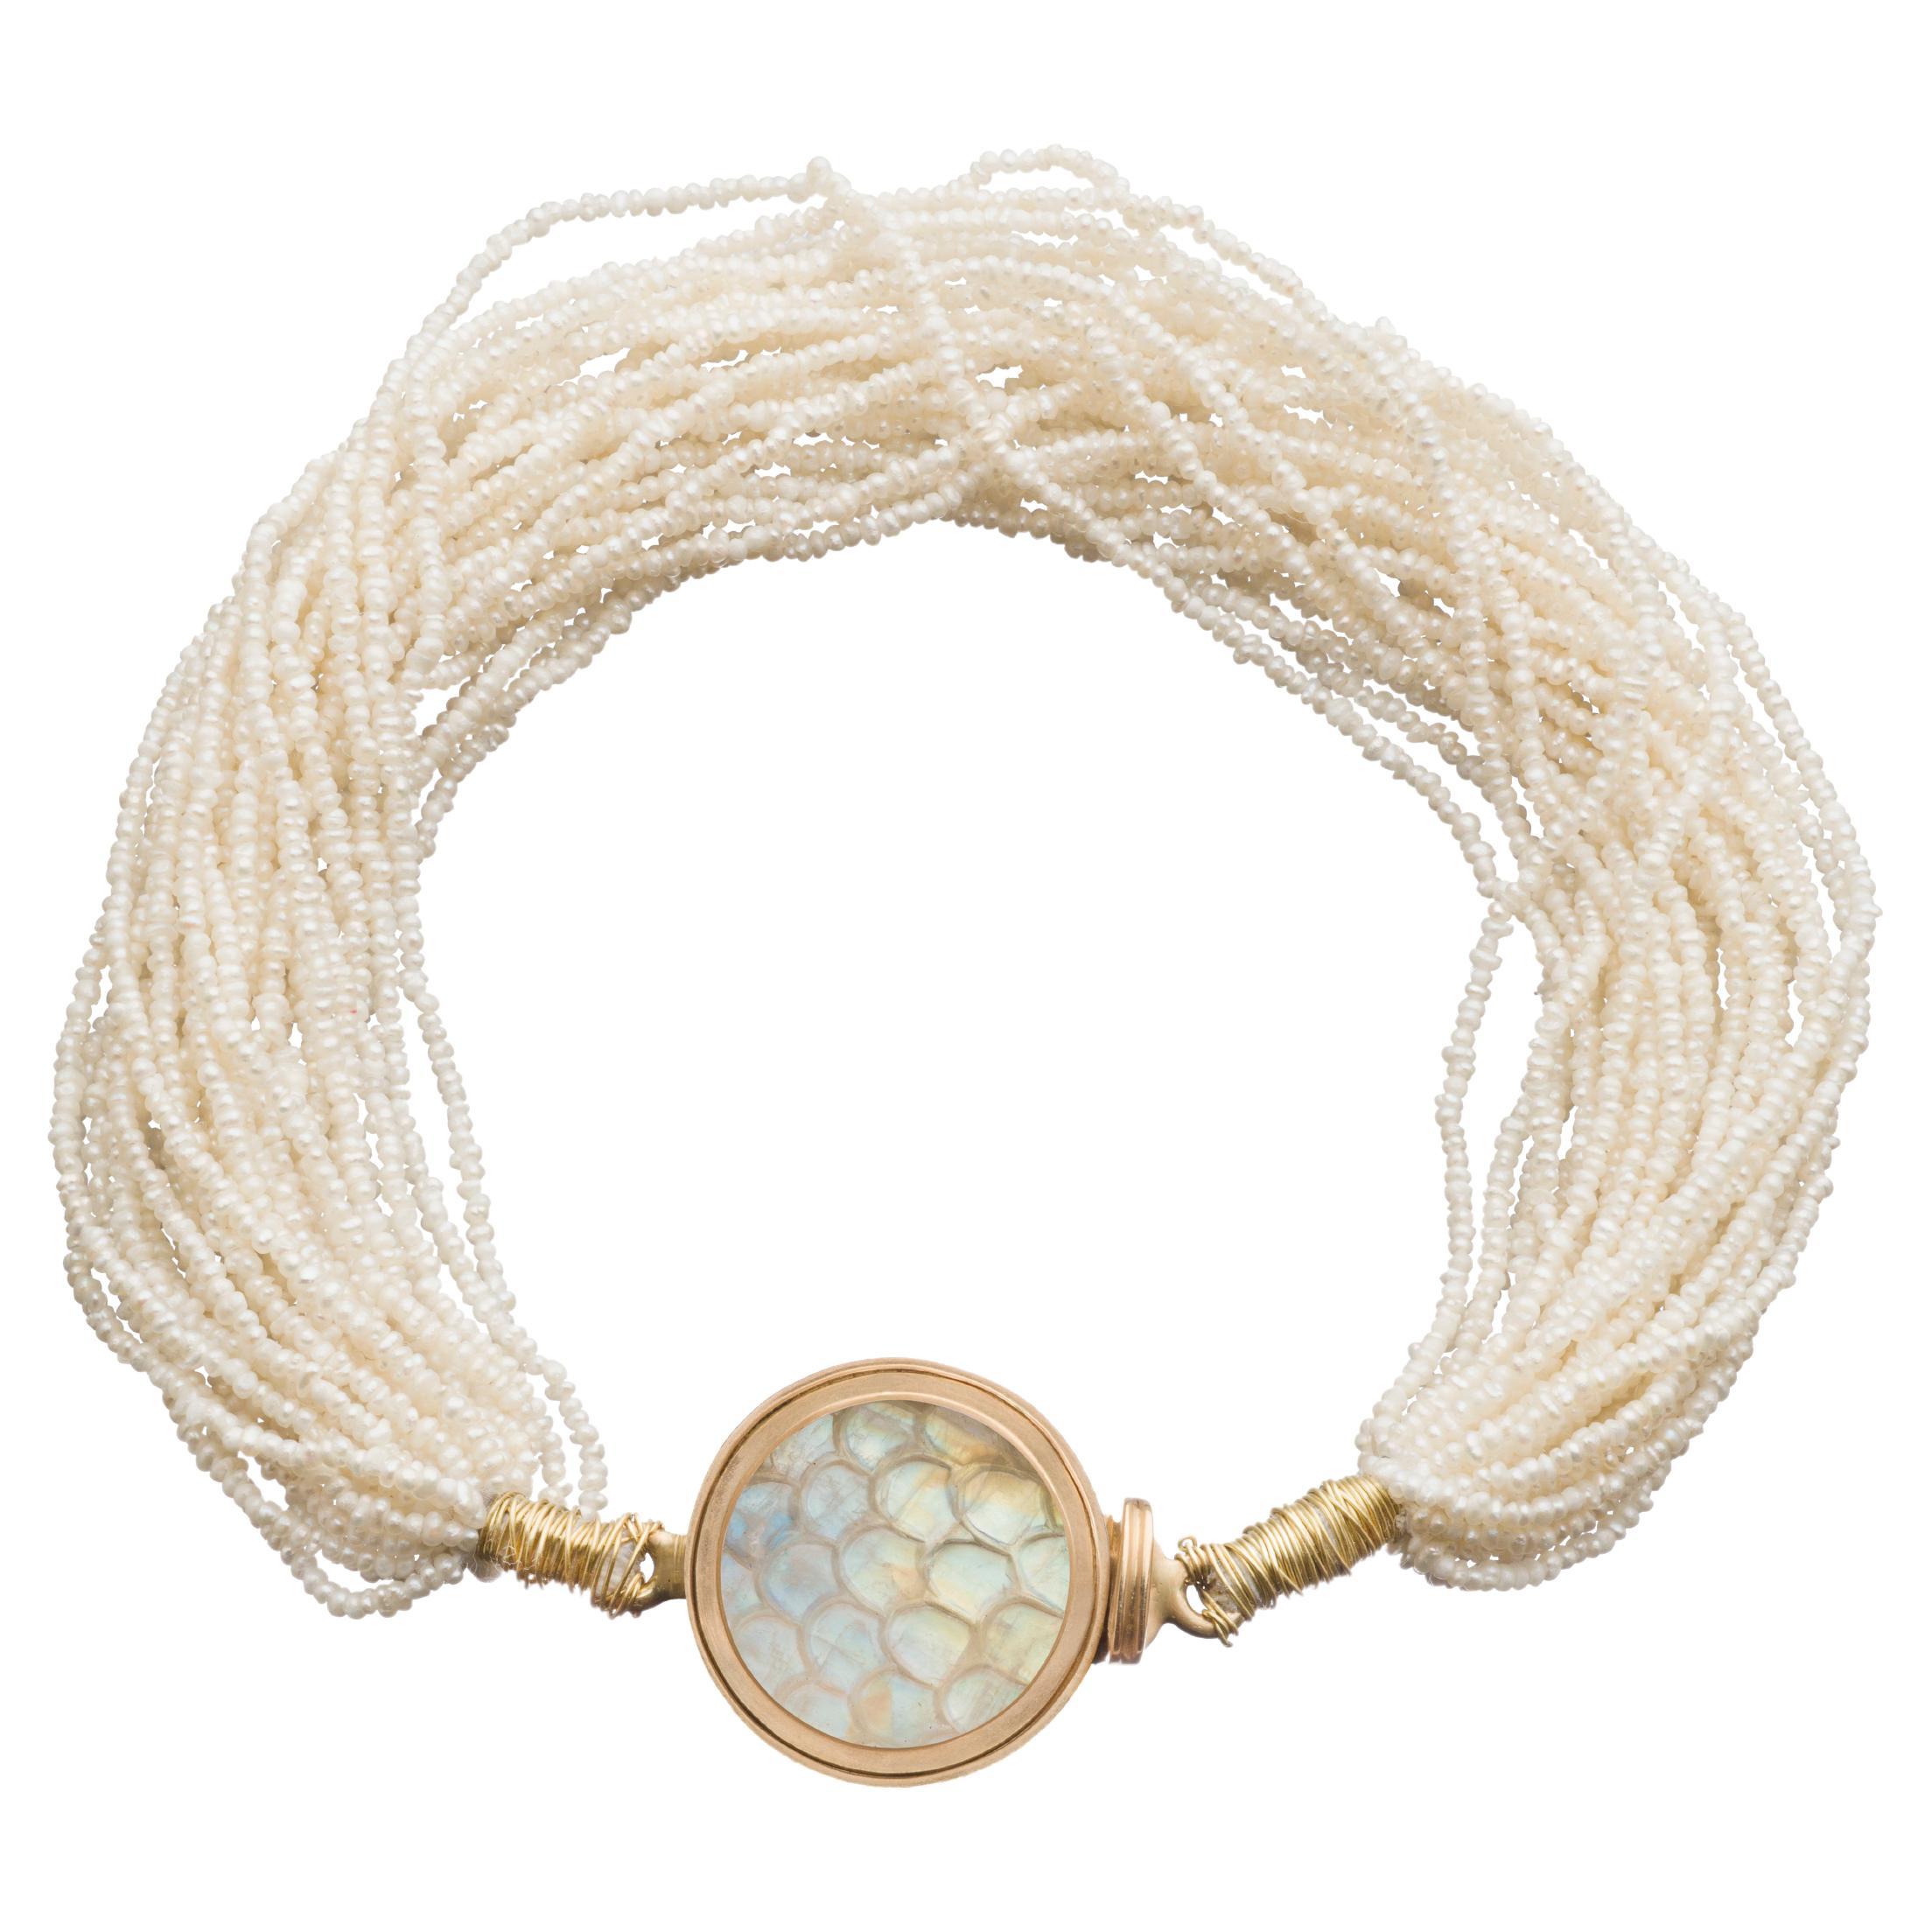 Ouroboros Rainbow Moonstone and Seed Pearl Bracelet set in Gold